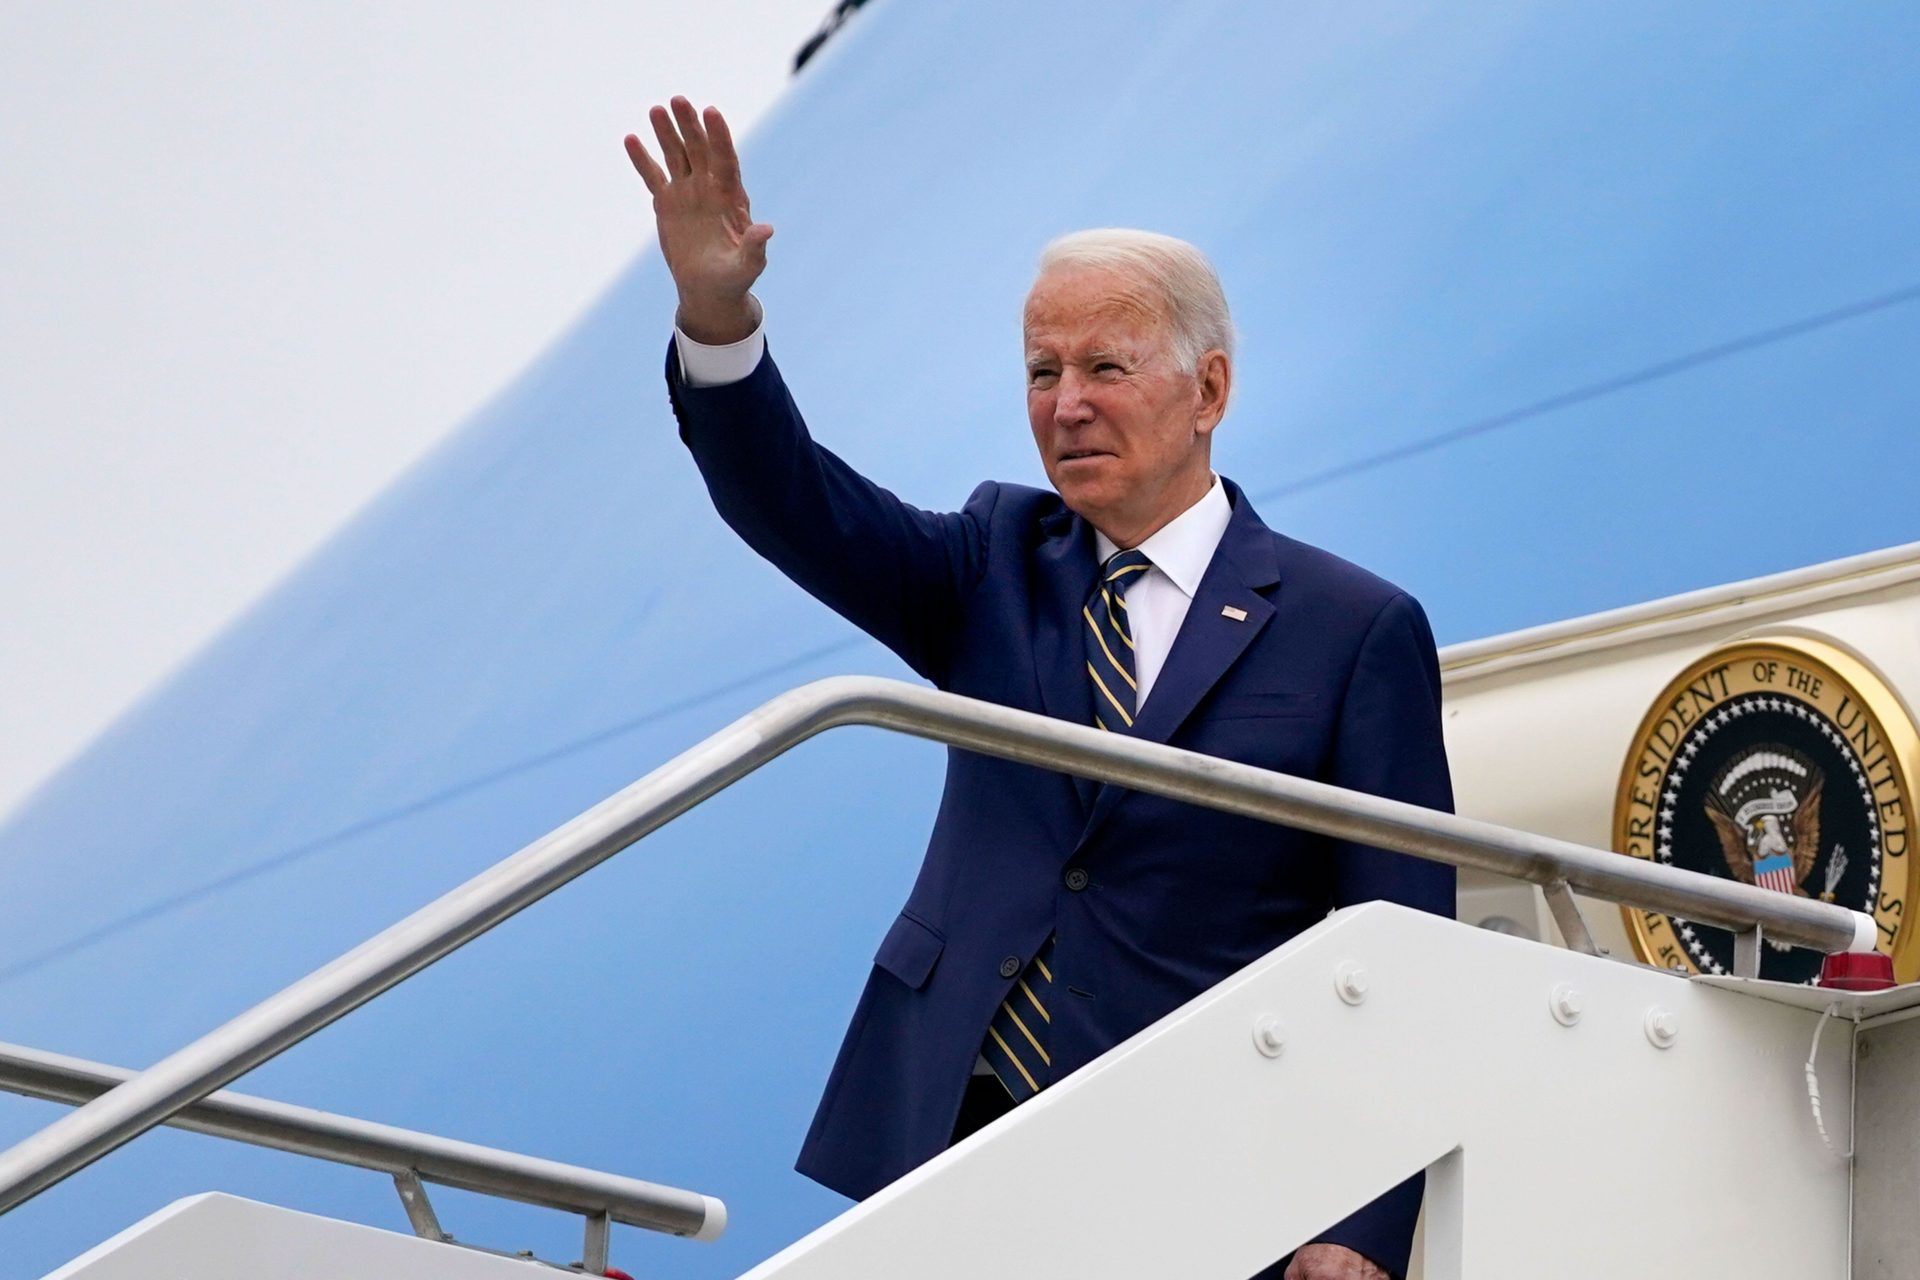 US President Joe Biden waves as he boards Air Force One after attending a G20 summit in Rome, Italy in November 2021.